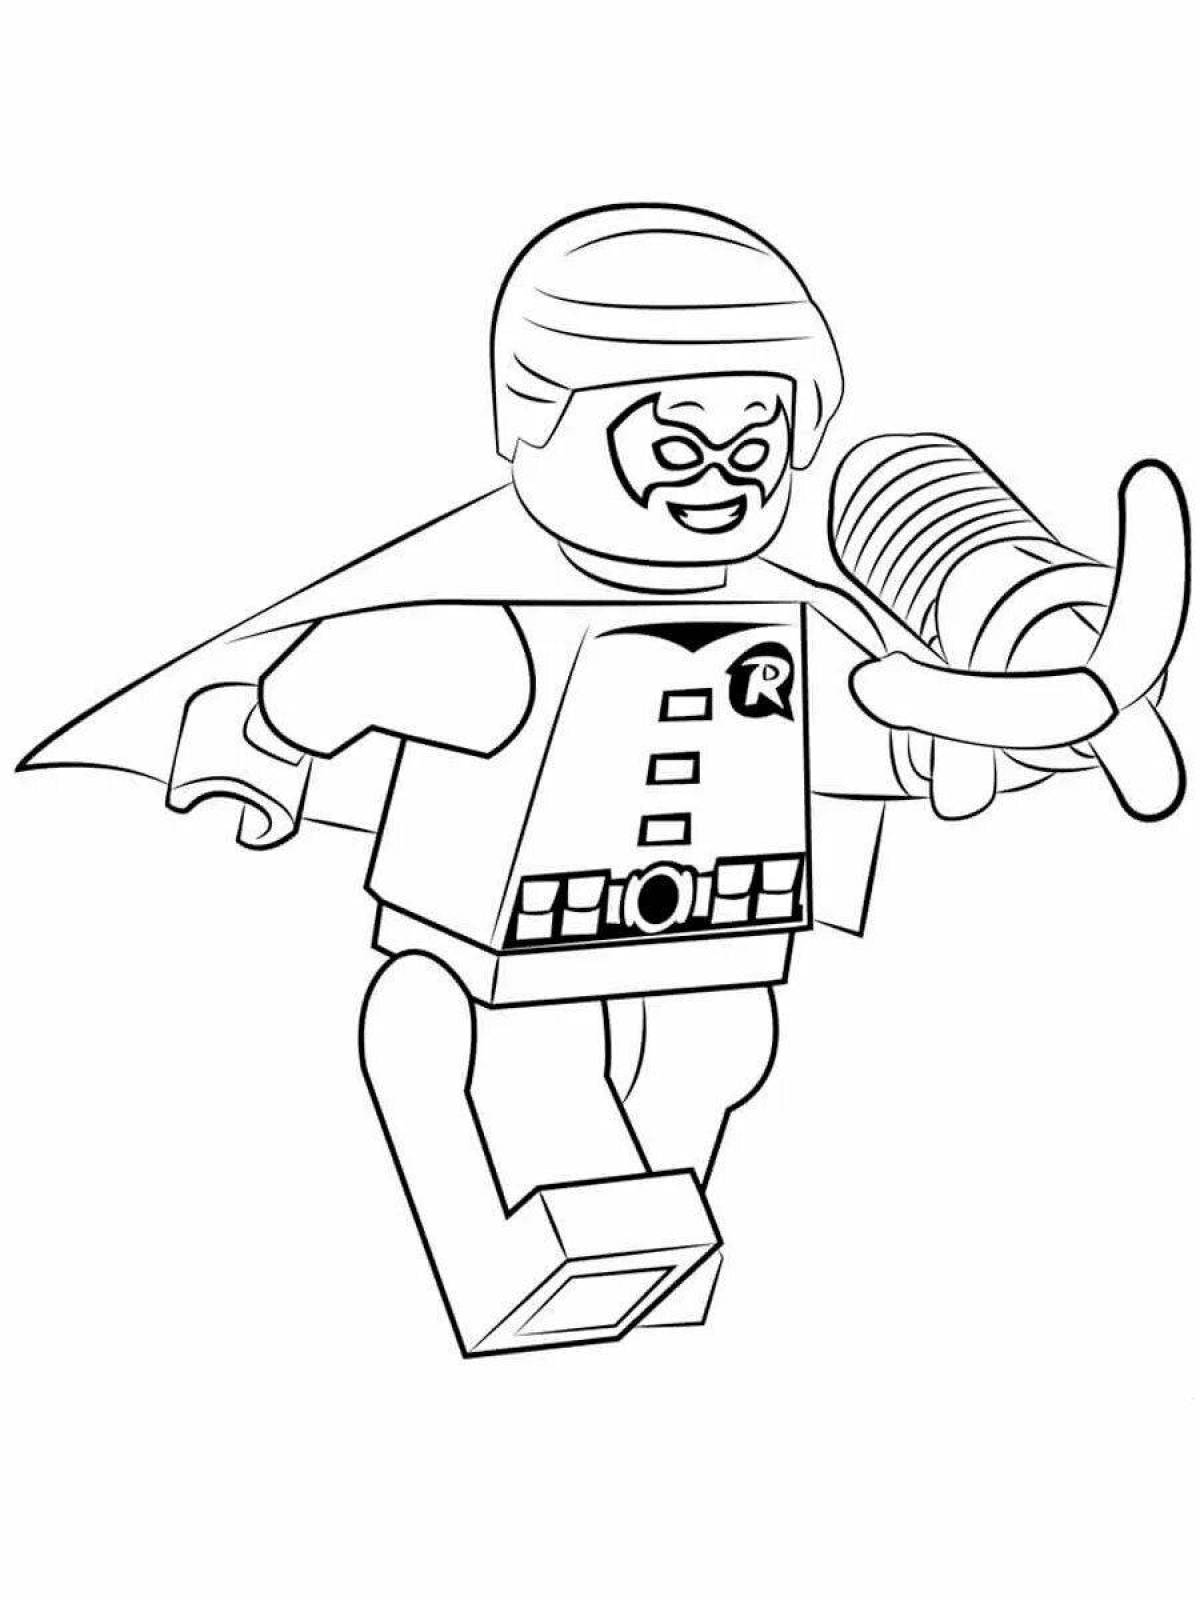 Fantastic lego zombie coloring page